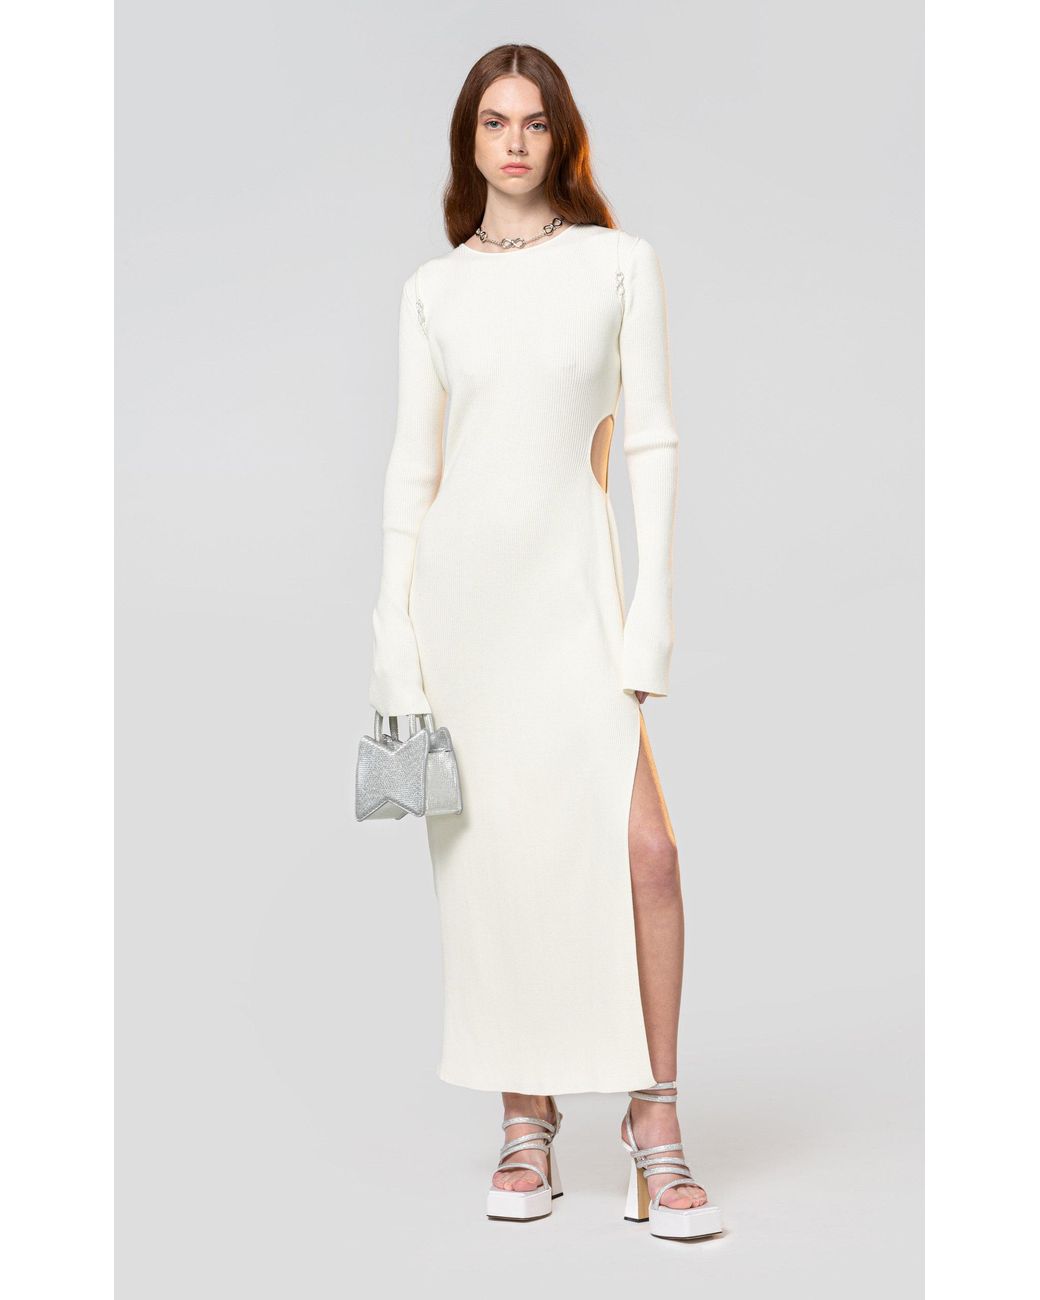 White Snatched Rib Contrast Binding Cut Out Dress